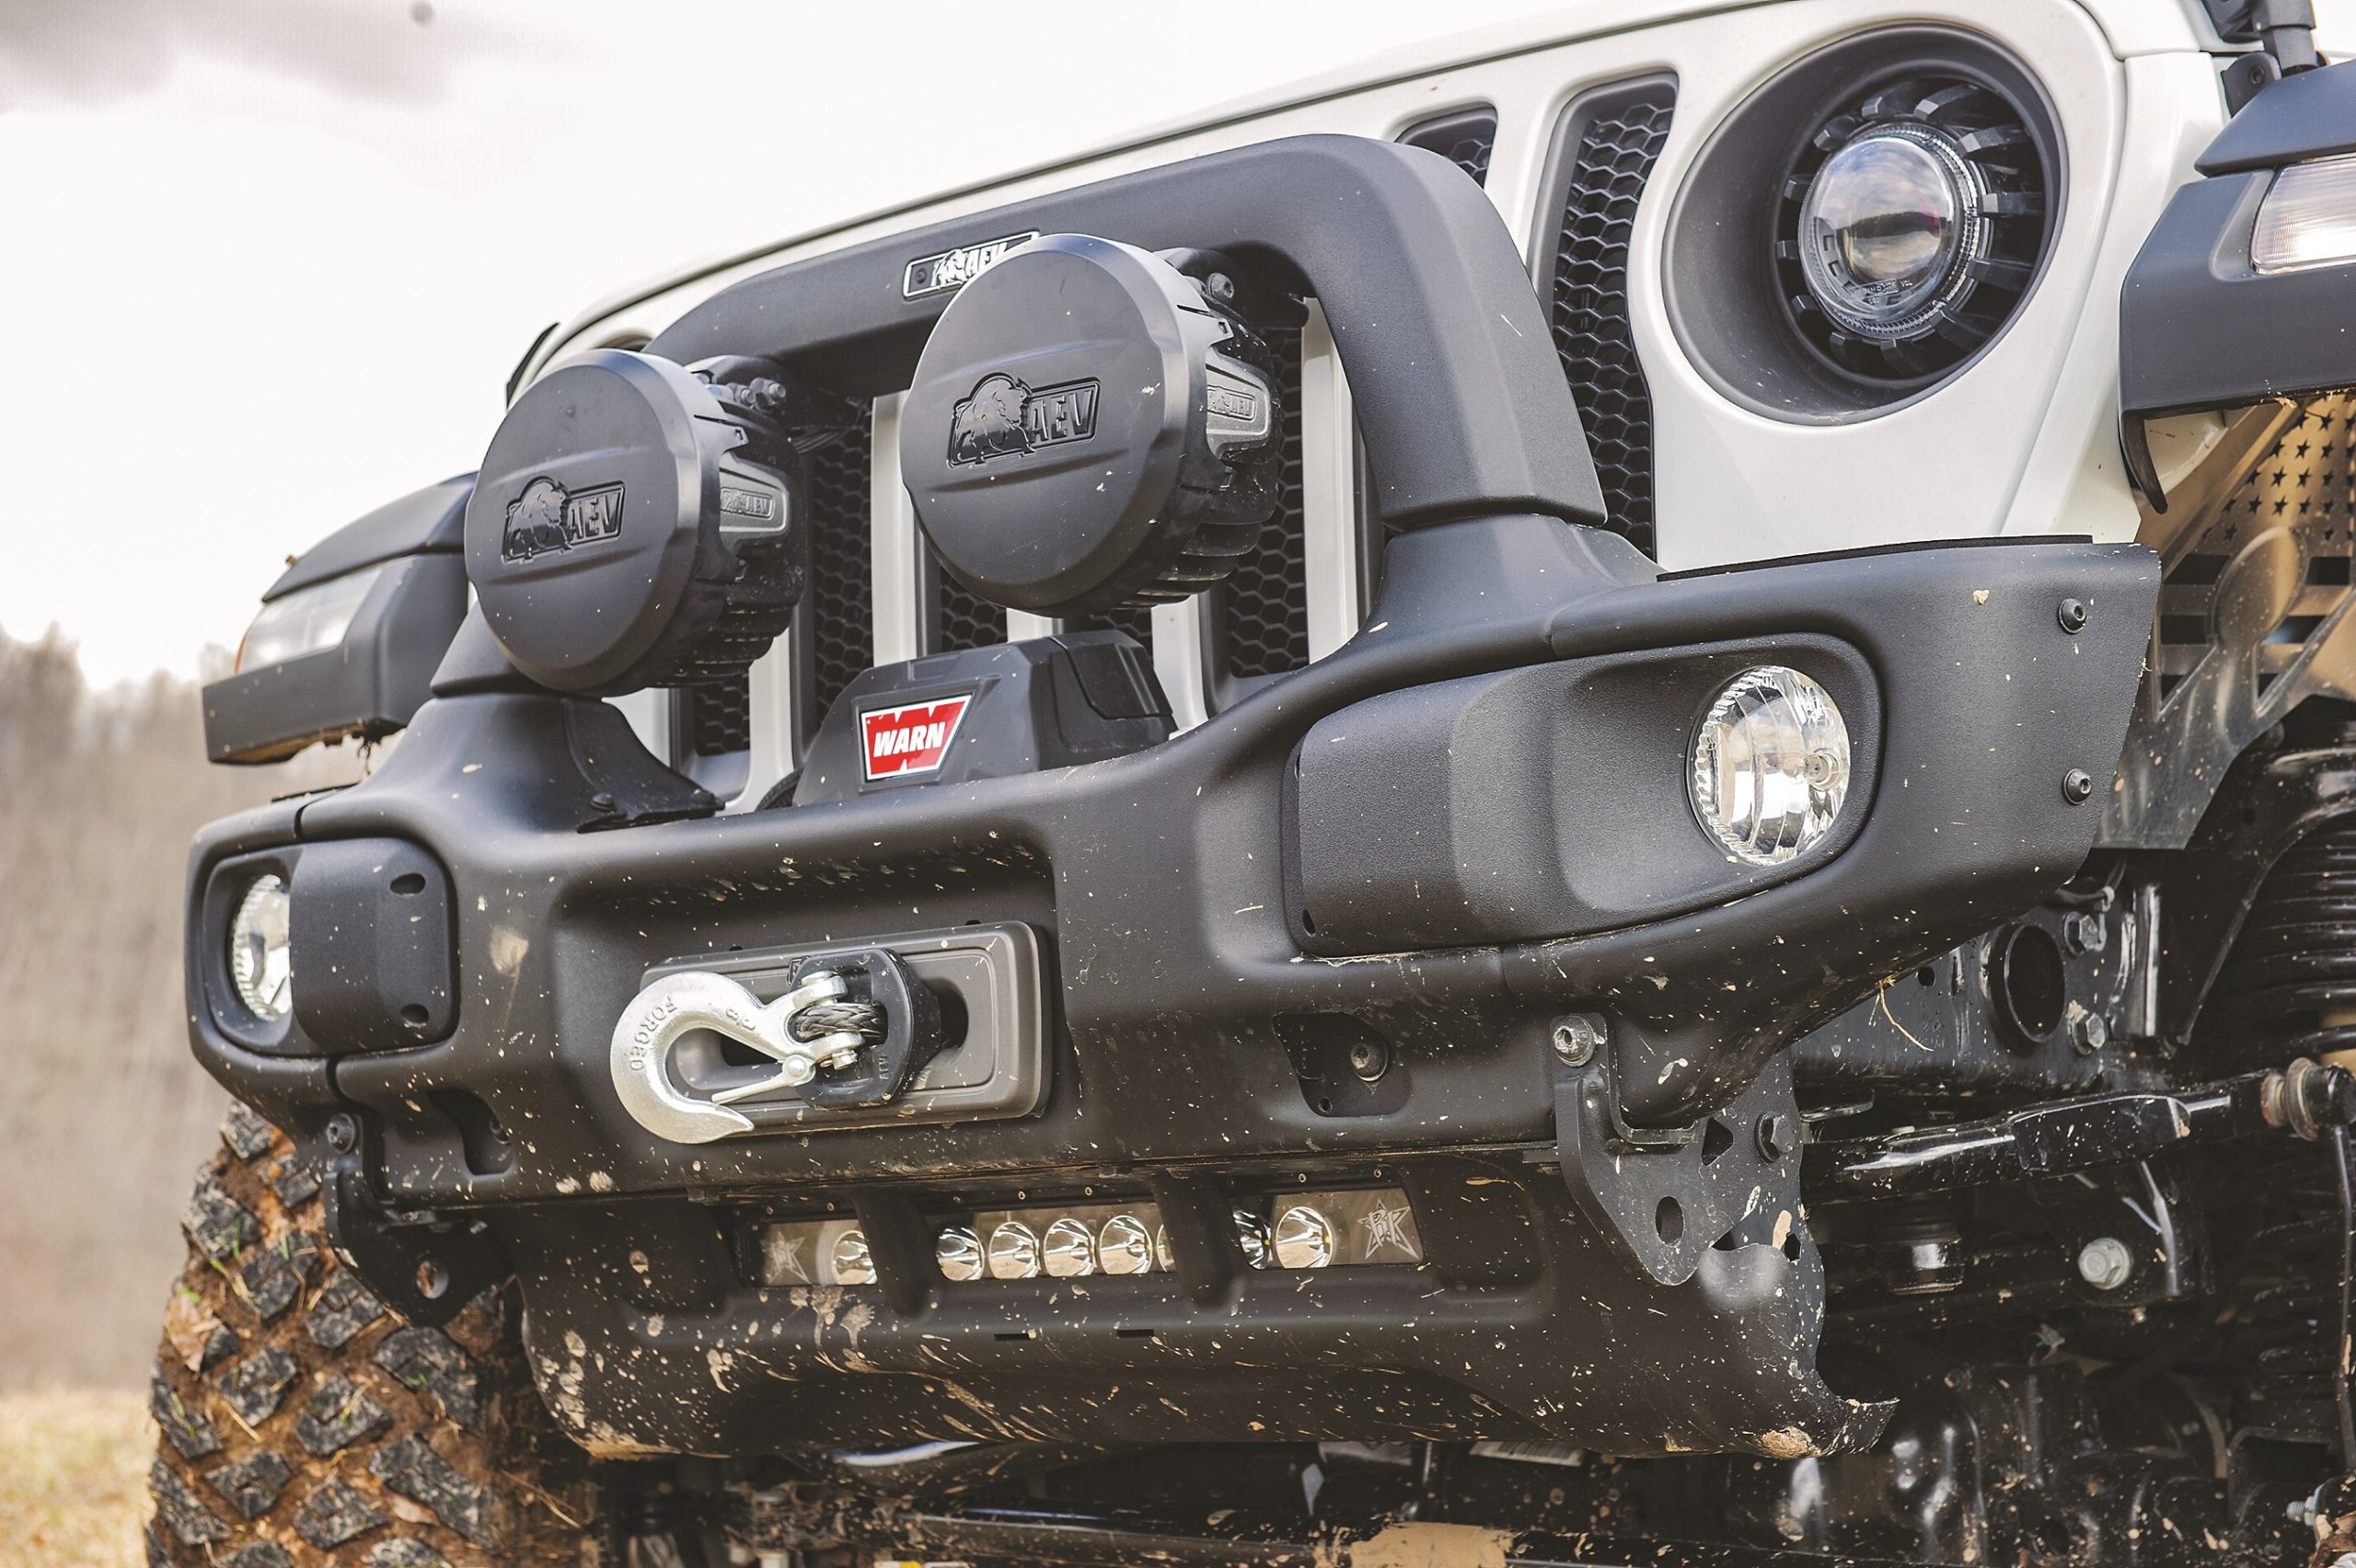 Project Jeep Wrangler (Part 7): Off-Road Front Bumper & Winch Upgrades